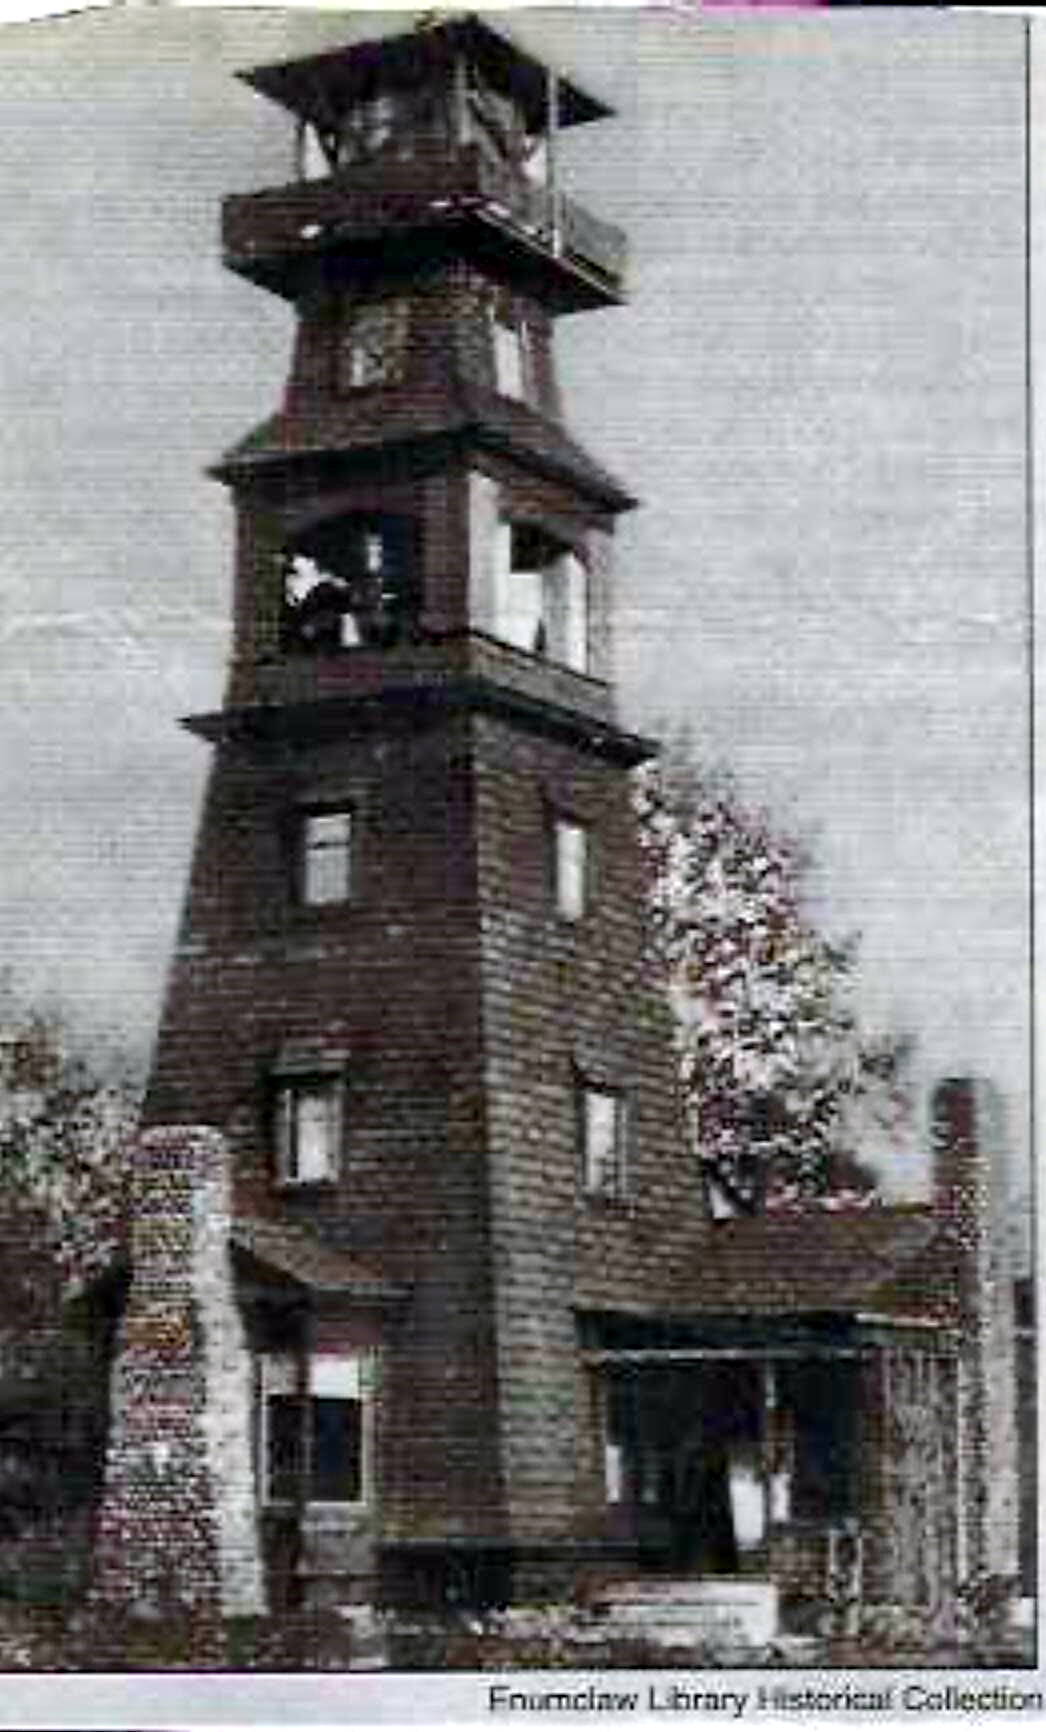 This photo, dated 1912, shows L. Robinson's tower. Image via Enumclaw Library Historical Collection.